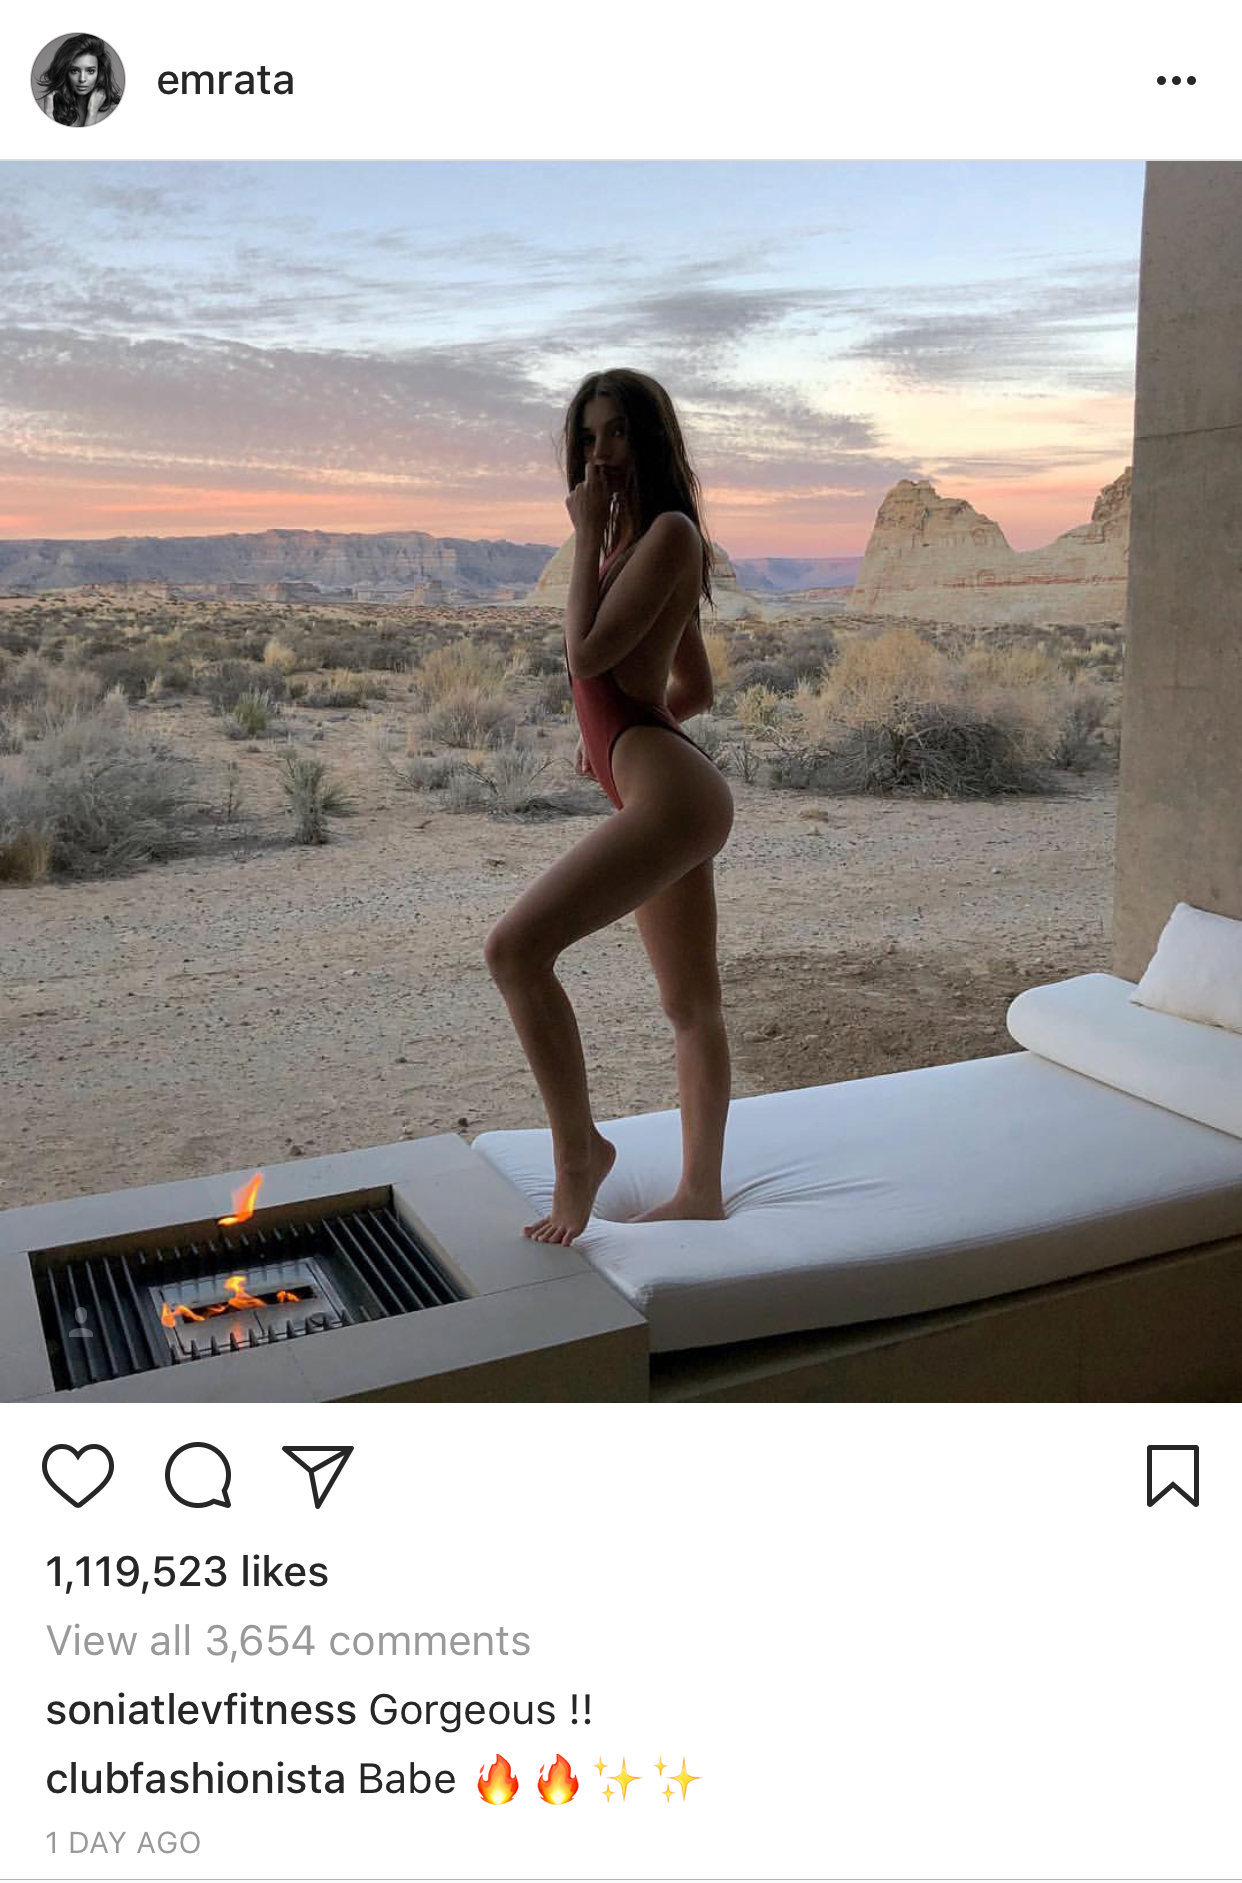 a woman in a swimsuit standing on a bed in a desert